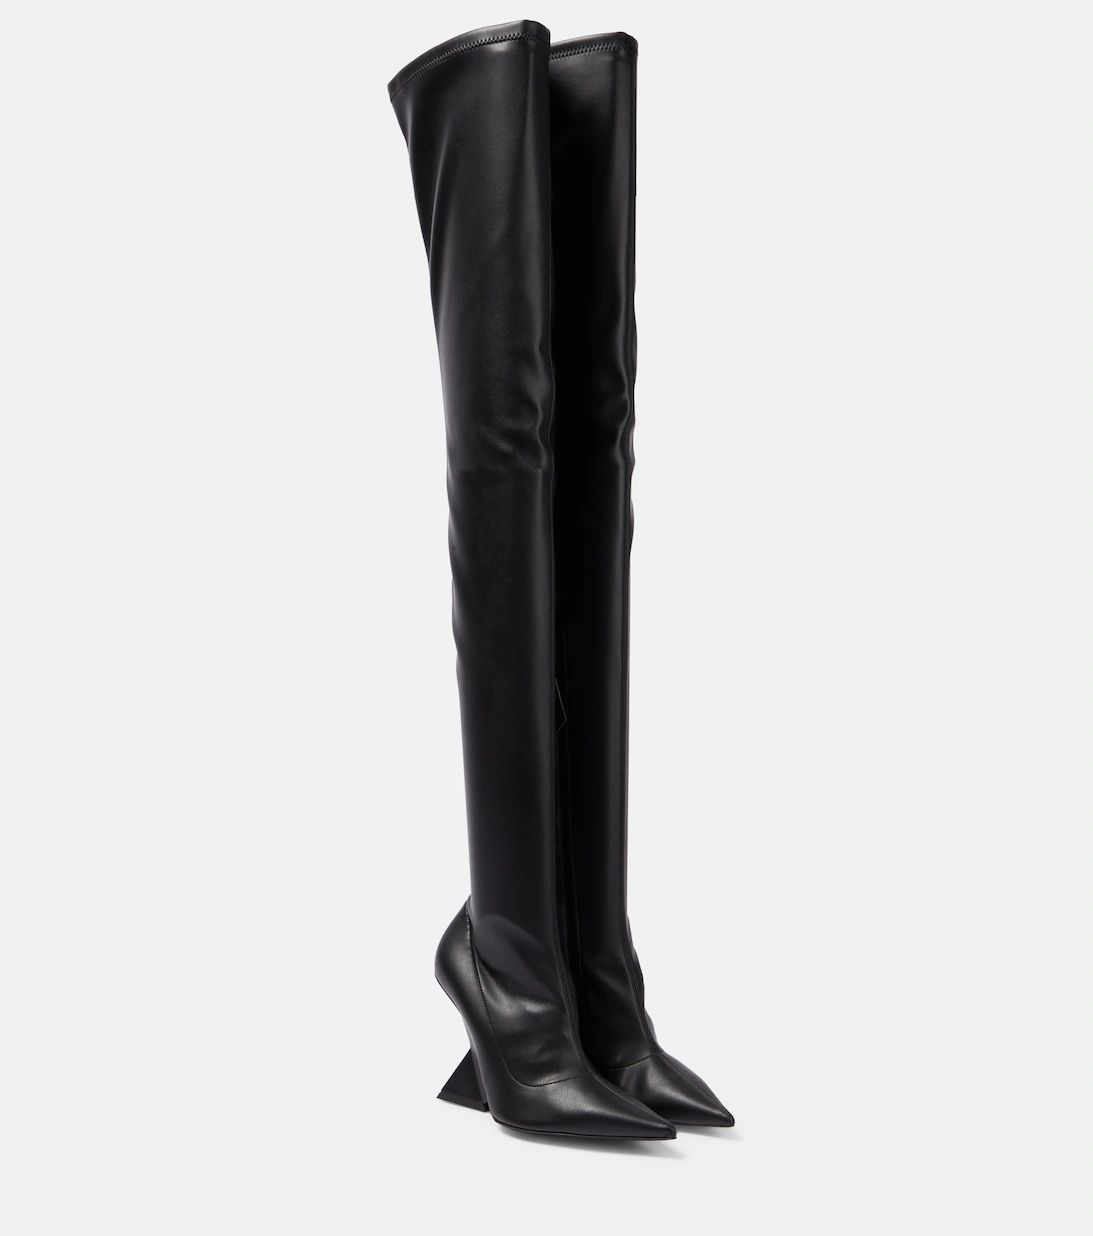 Cheope leather over-the-knee boots | Mytheresa (UK)